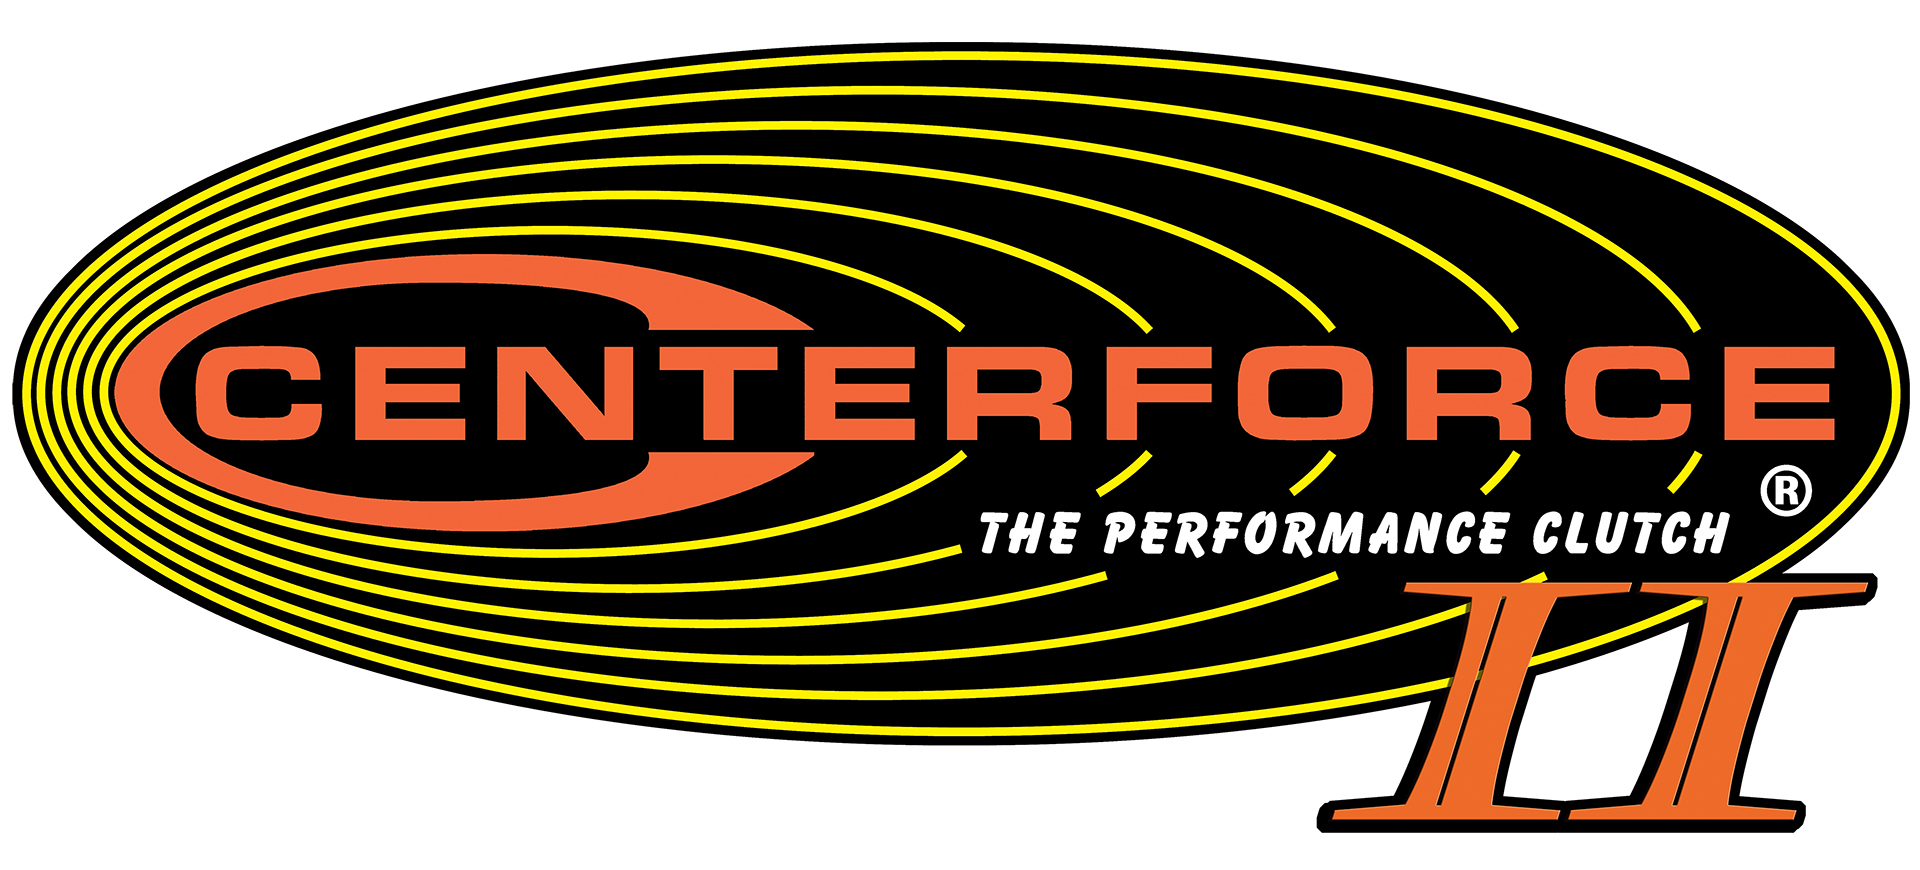 Centerforce - The Performance Clutch 2